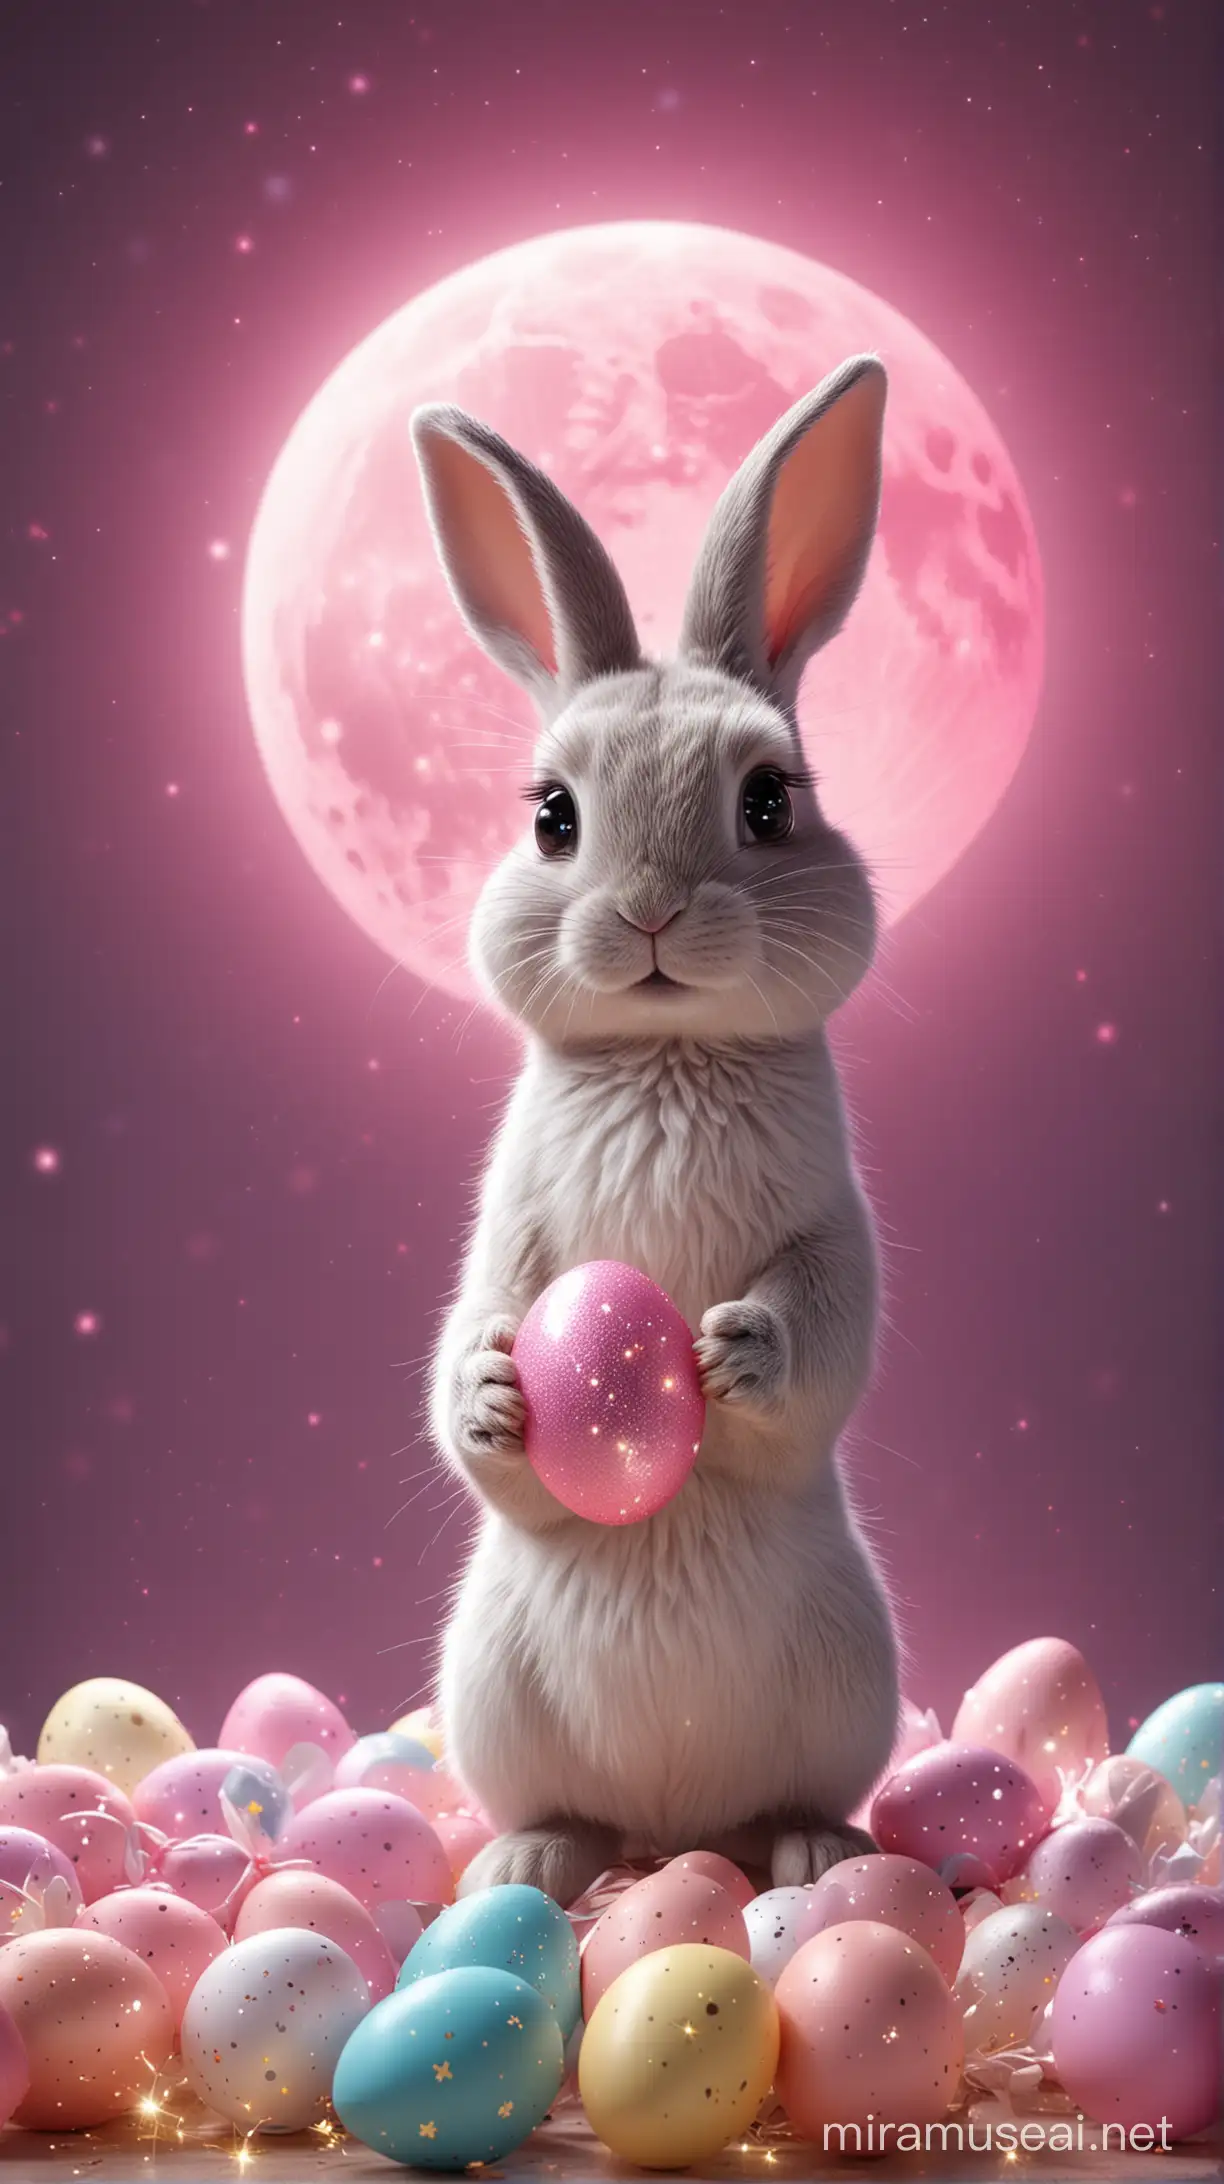 Shimmering Easter Rabbit with Glittering Eggs under Midnight Pink Moon